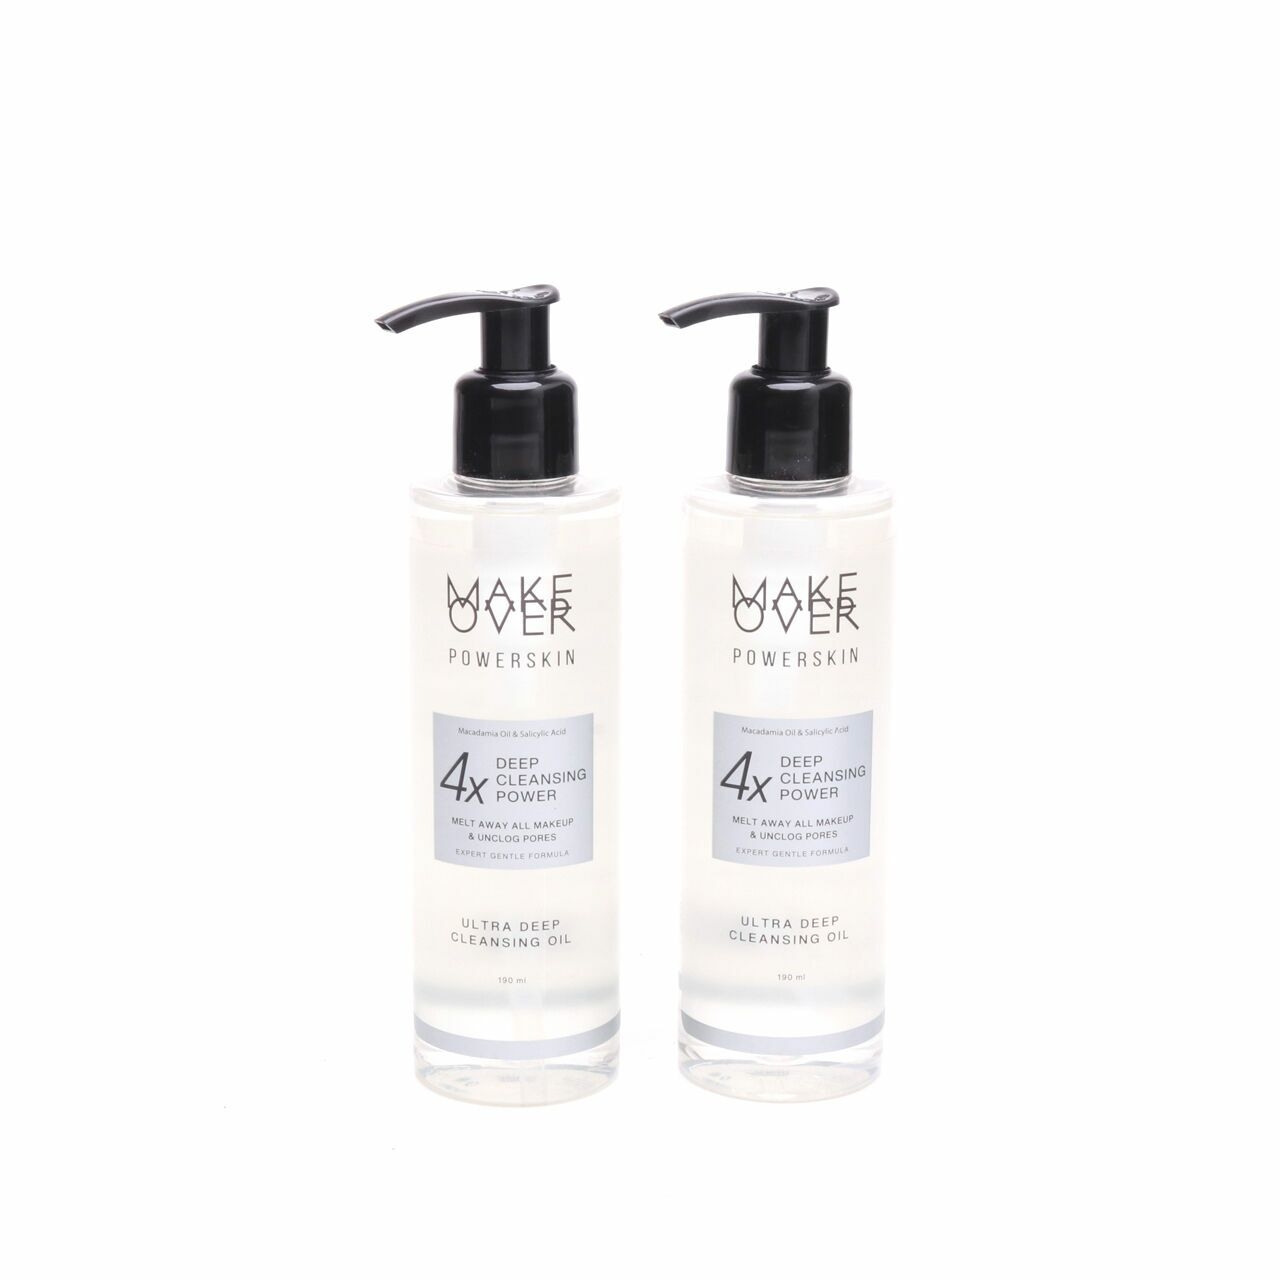 Make Over Power Skin 4x Deep Cleansing Power Sets